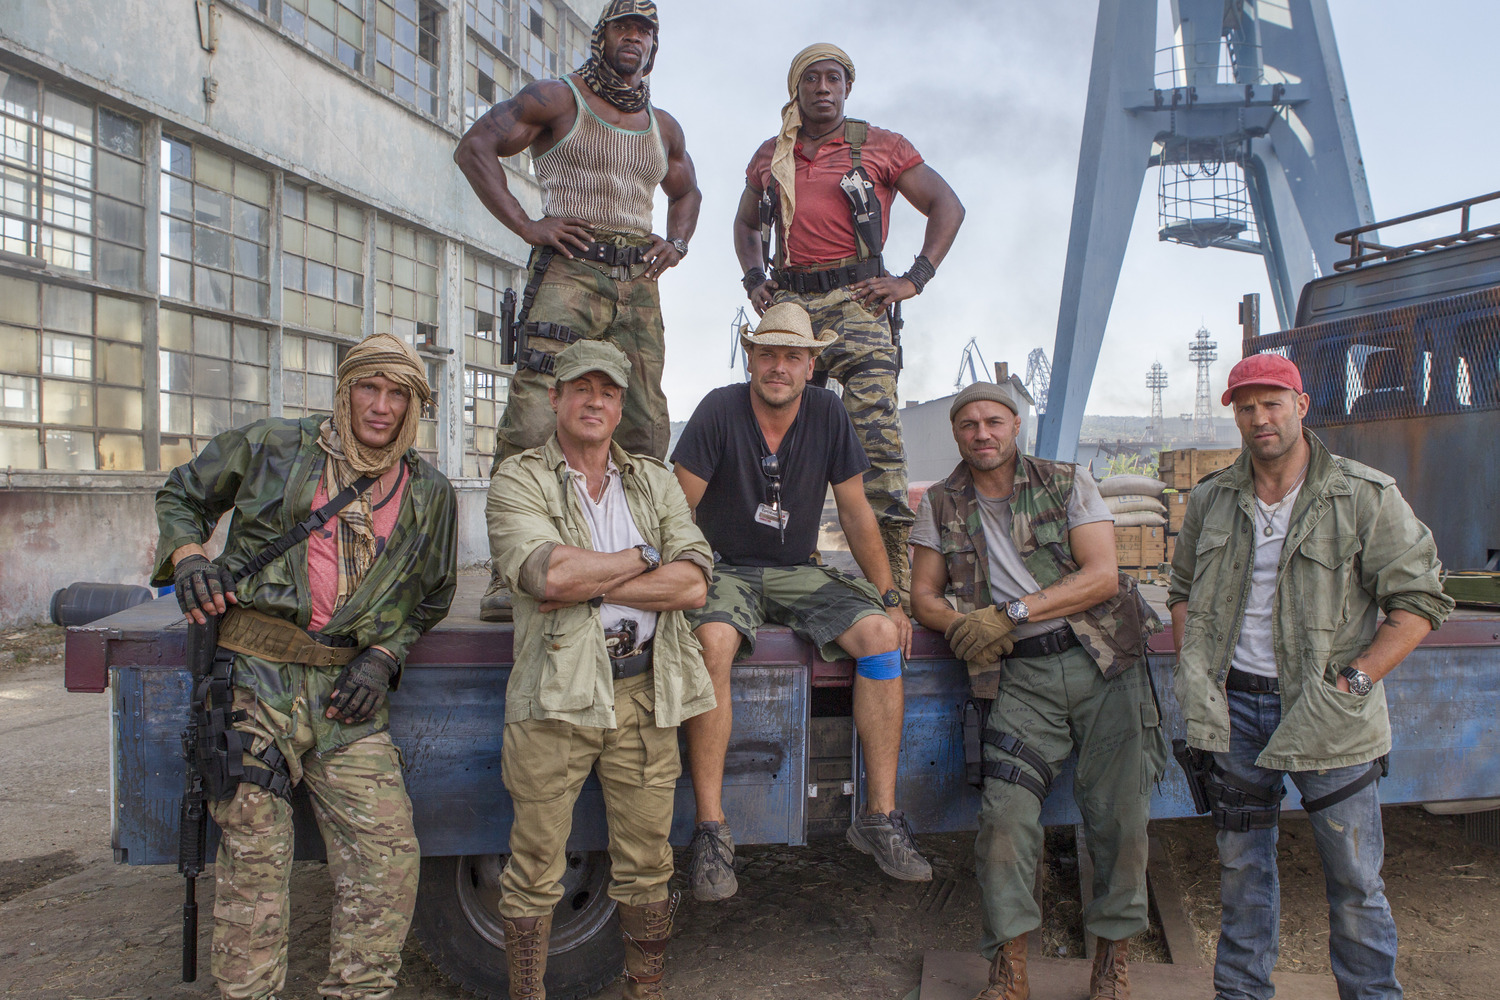 expendables-3-the-expendables-3-20-08-2014-17-g.jpg